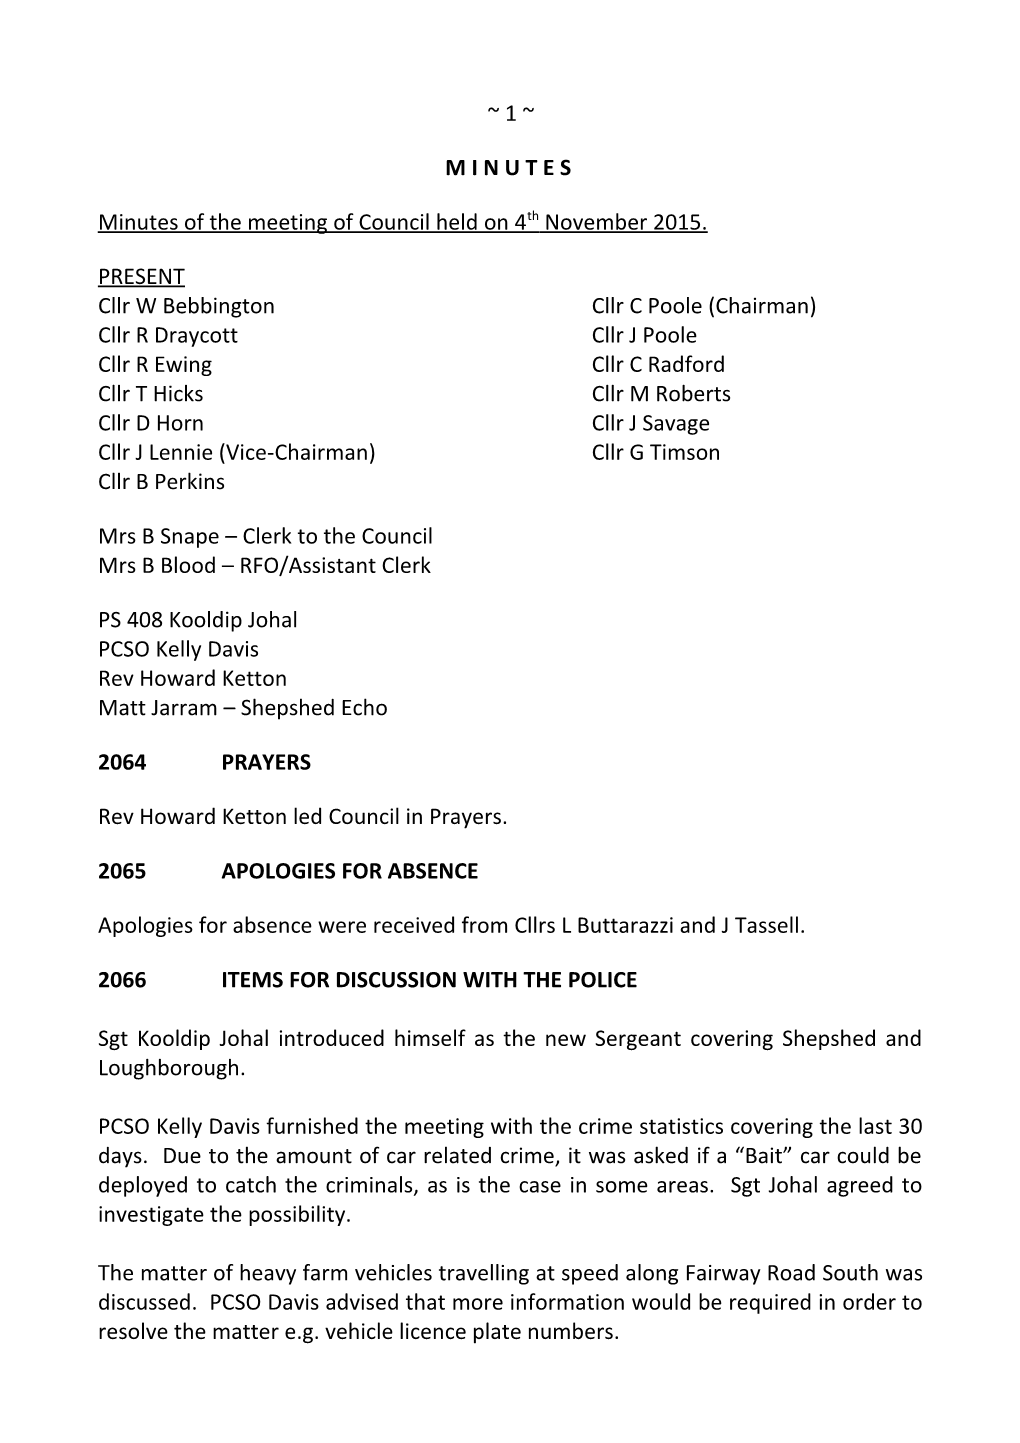 Minutes of the Meeting of Council Held on 4Th November 2015